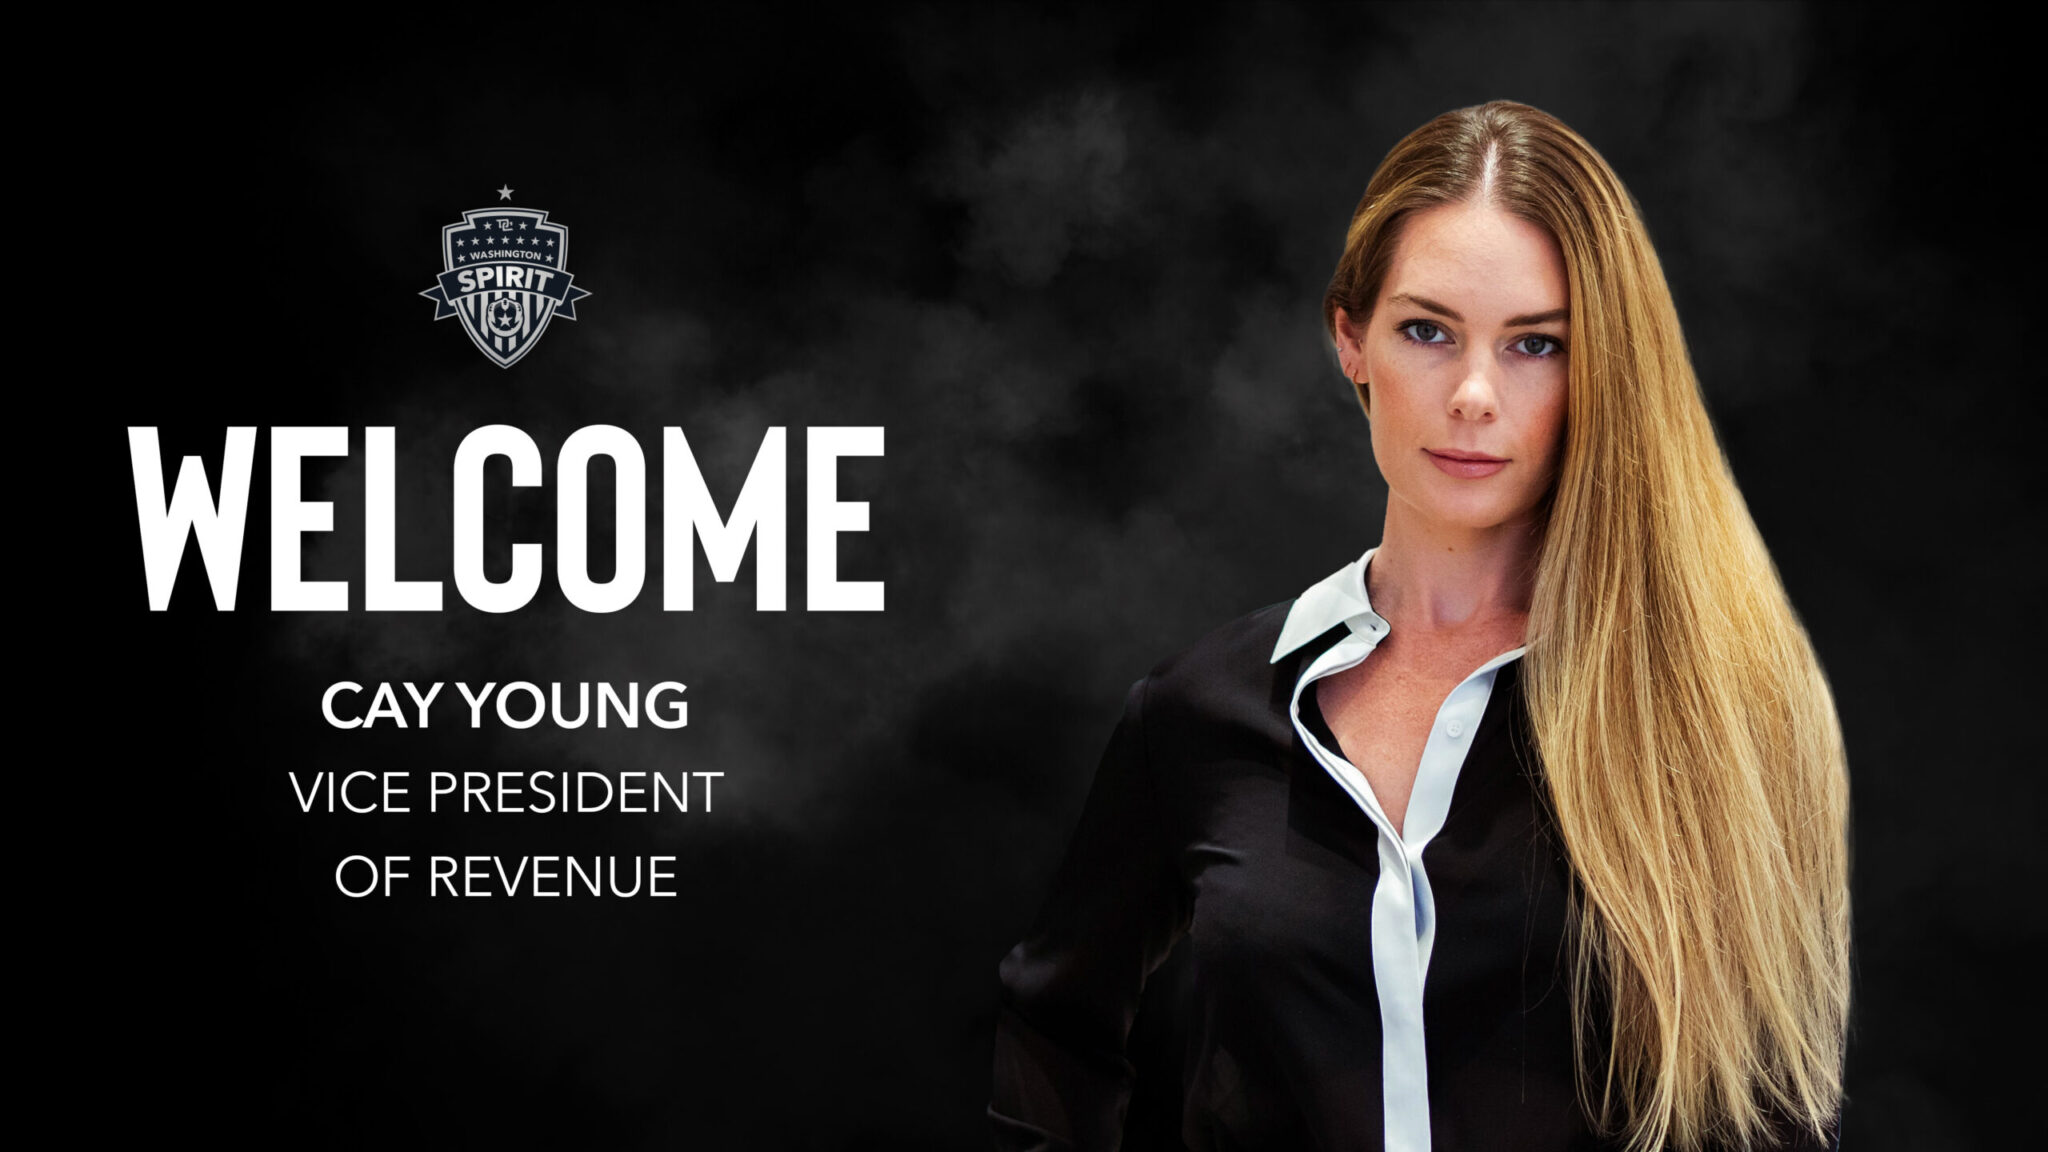 Washington Spirit Appoint Cay Young as Vice President of Revenue Featured Image